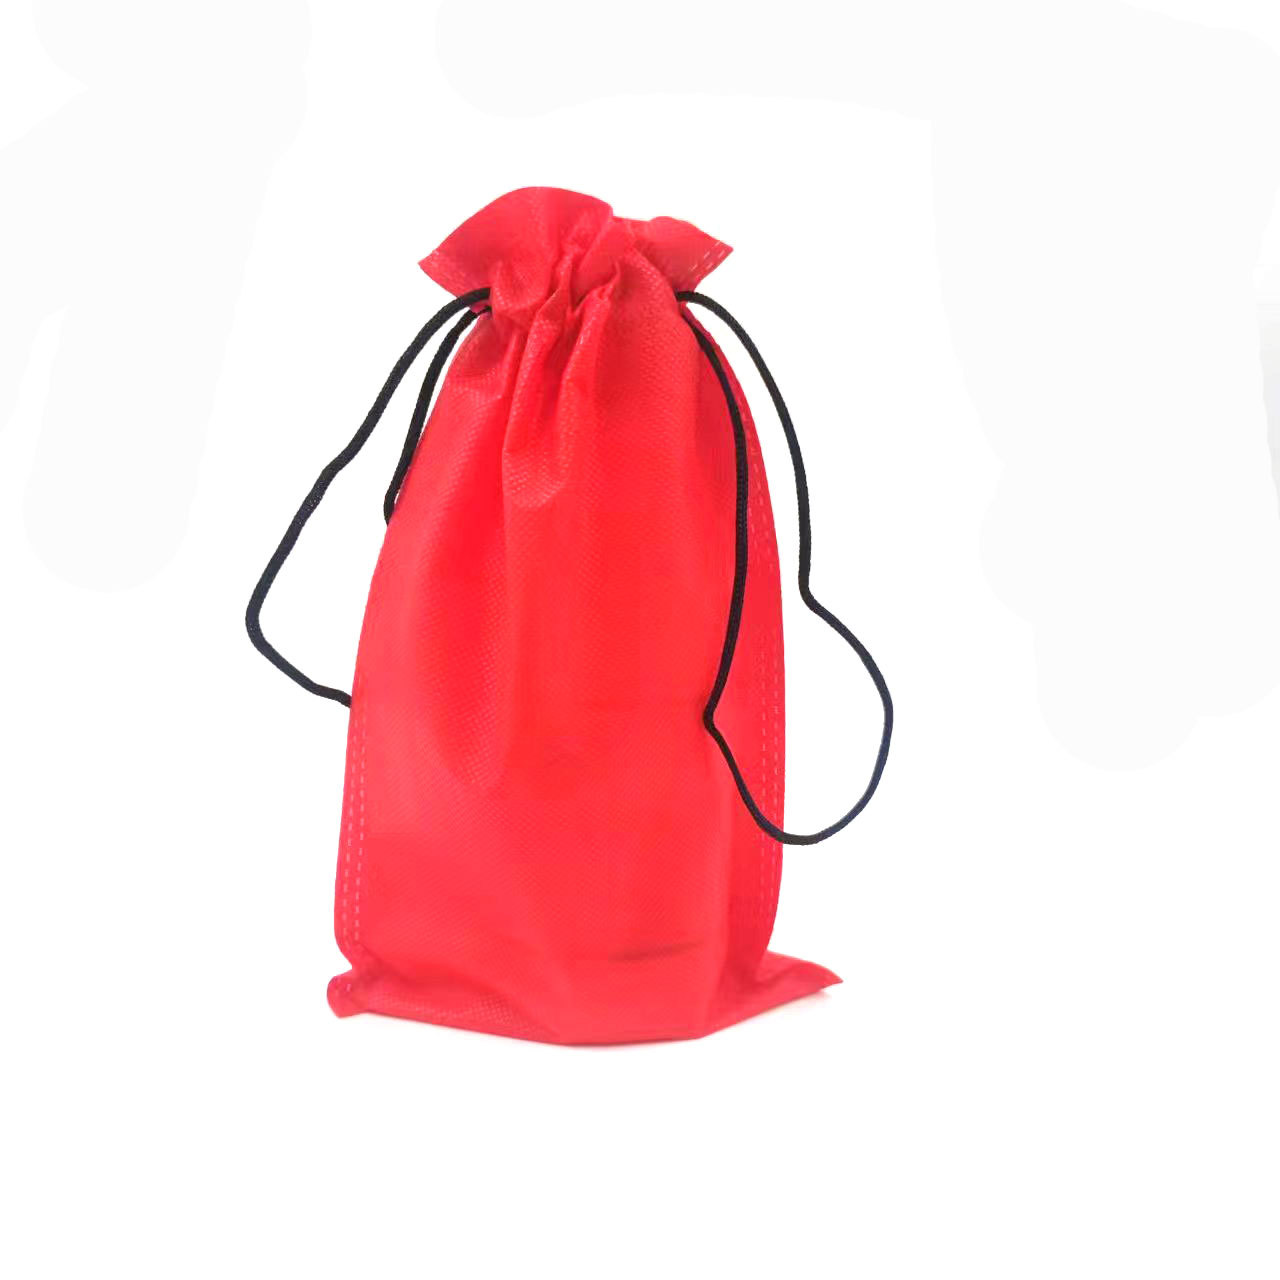 Non-Woven Drawstring Pouch Drawstring Jewelry Bag Hot Pressing Flat Bag Non-Woven Fabric Storage Inner Bag Cup Bag